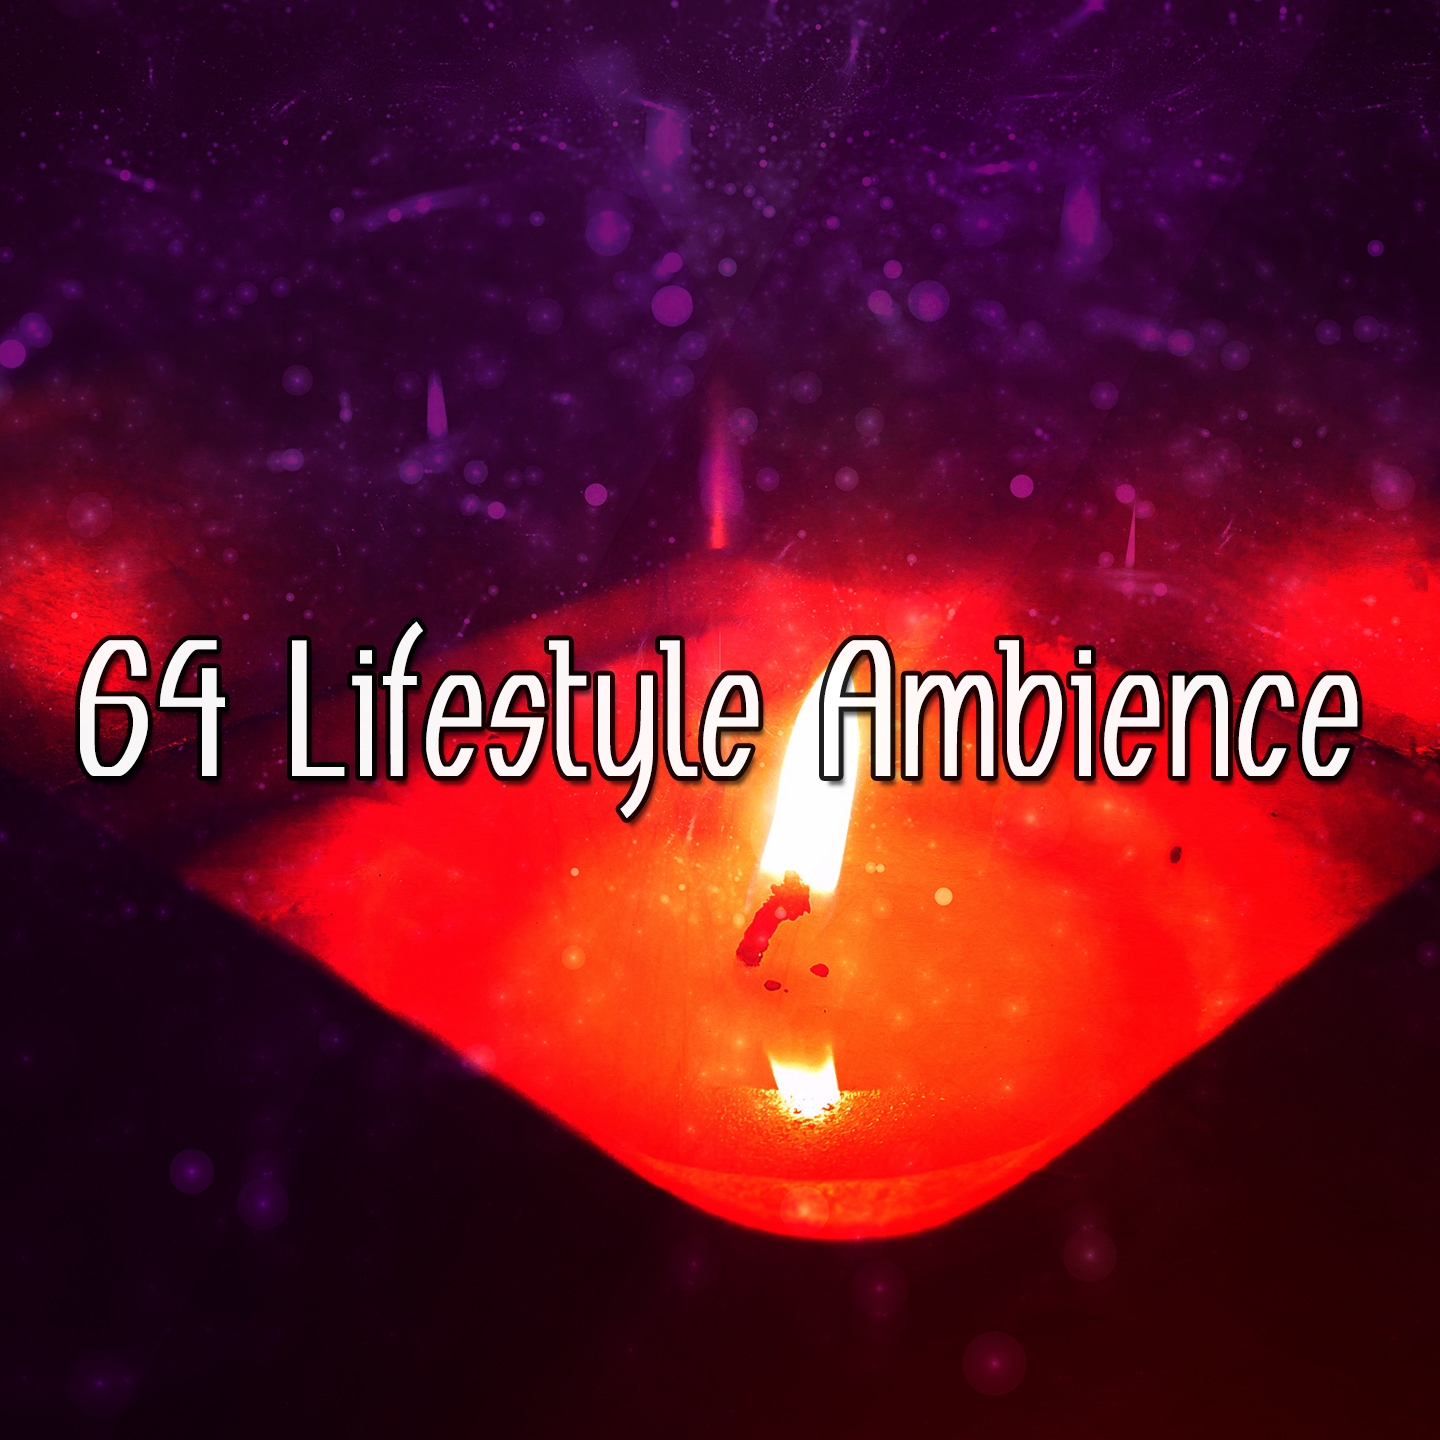 64 Lifestyle Ambience